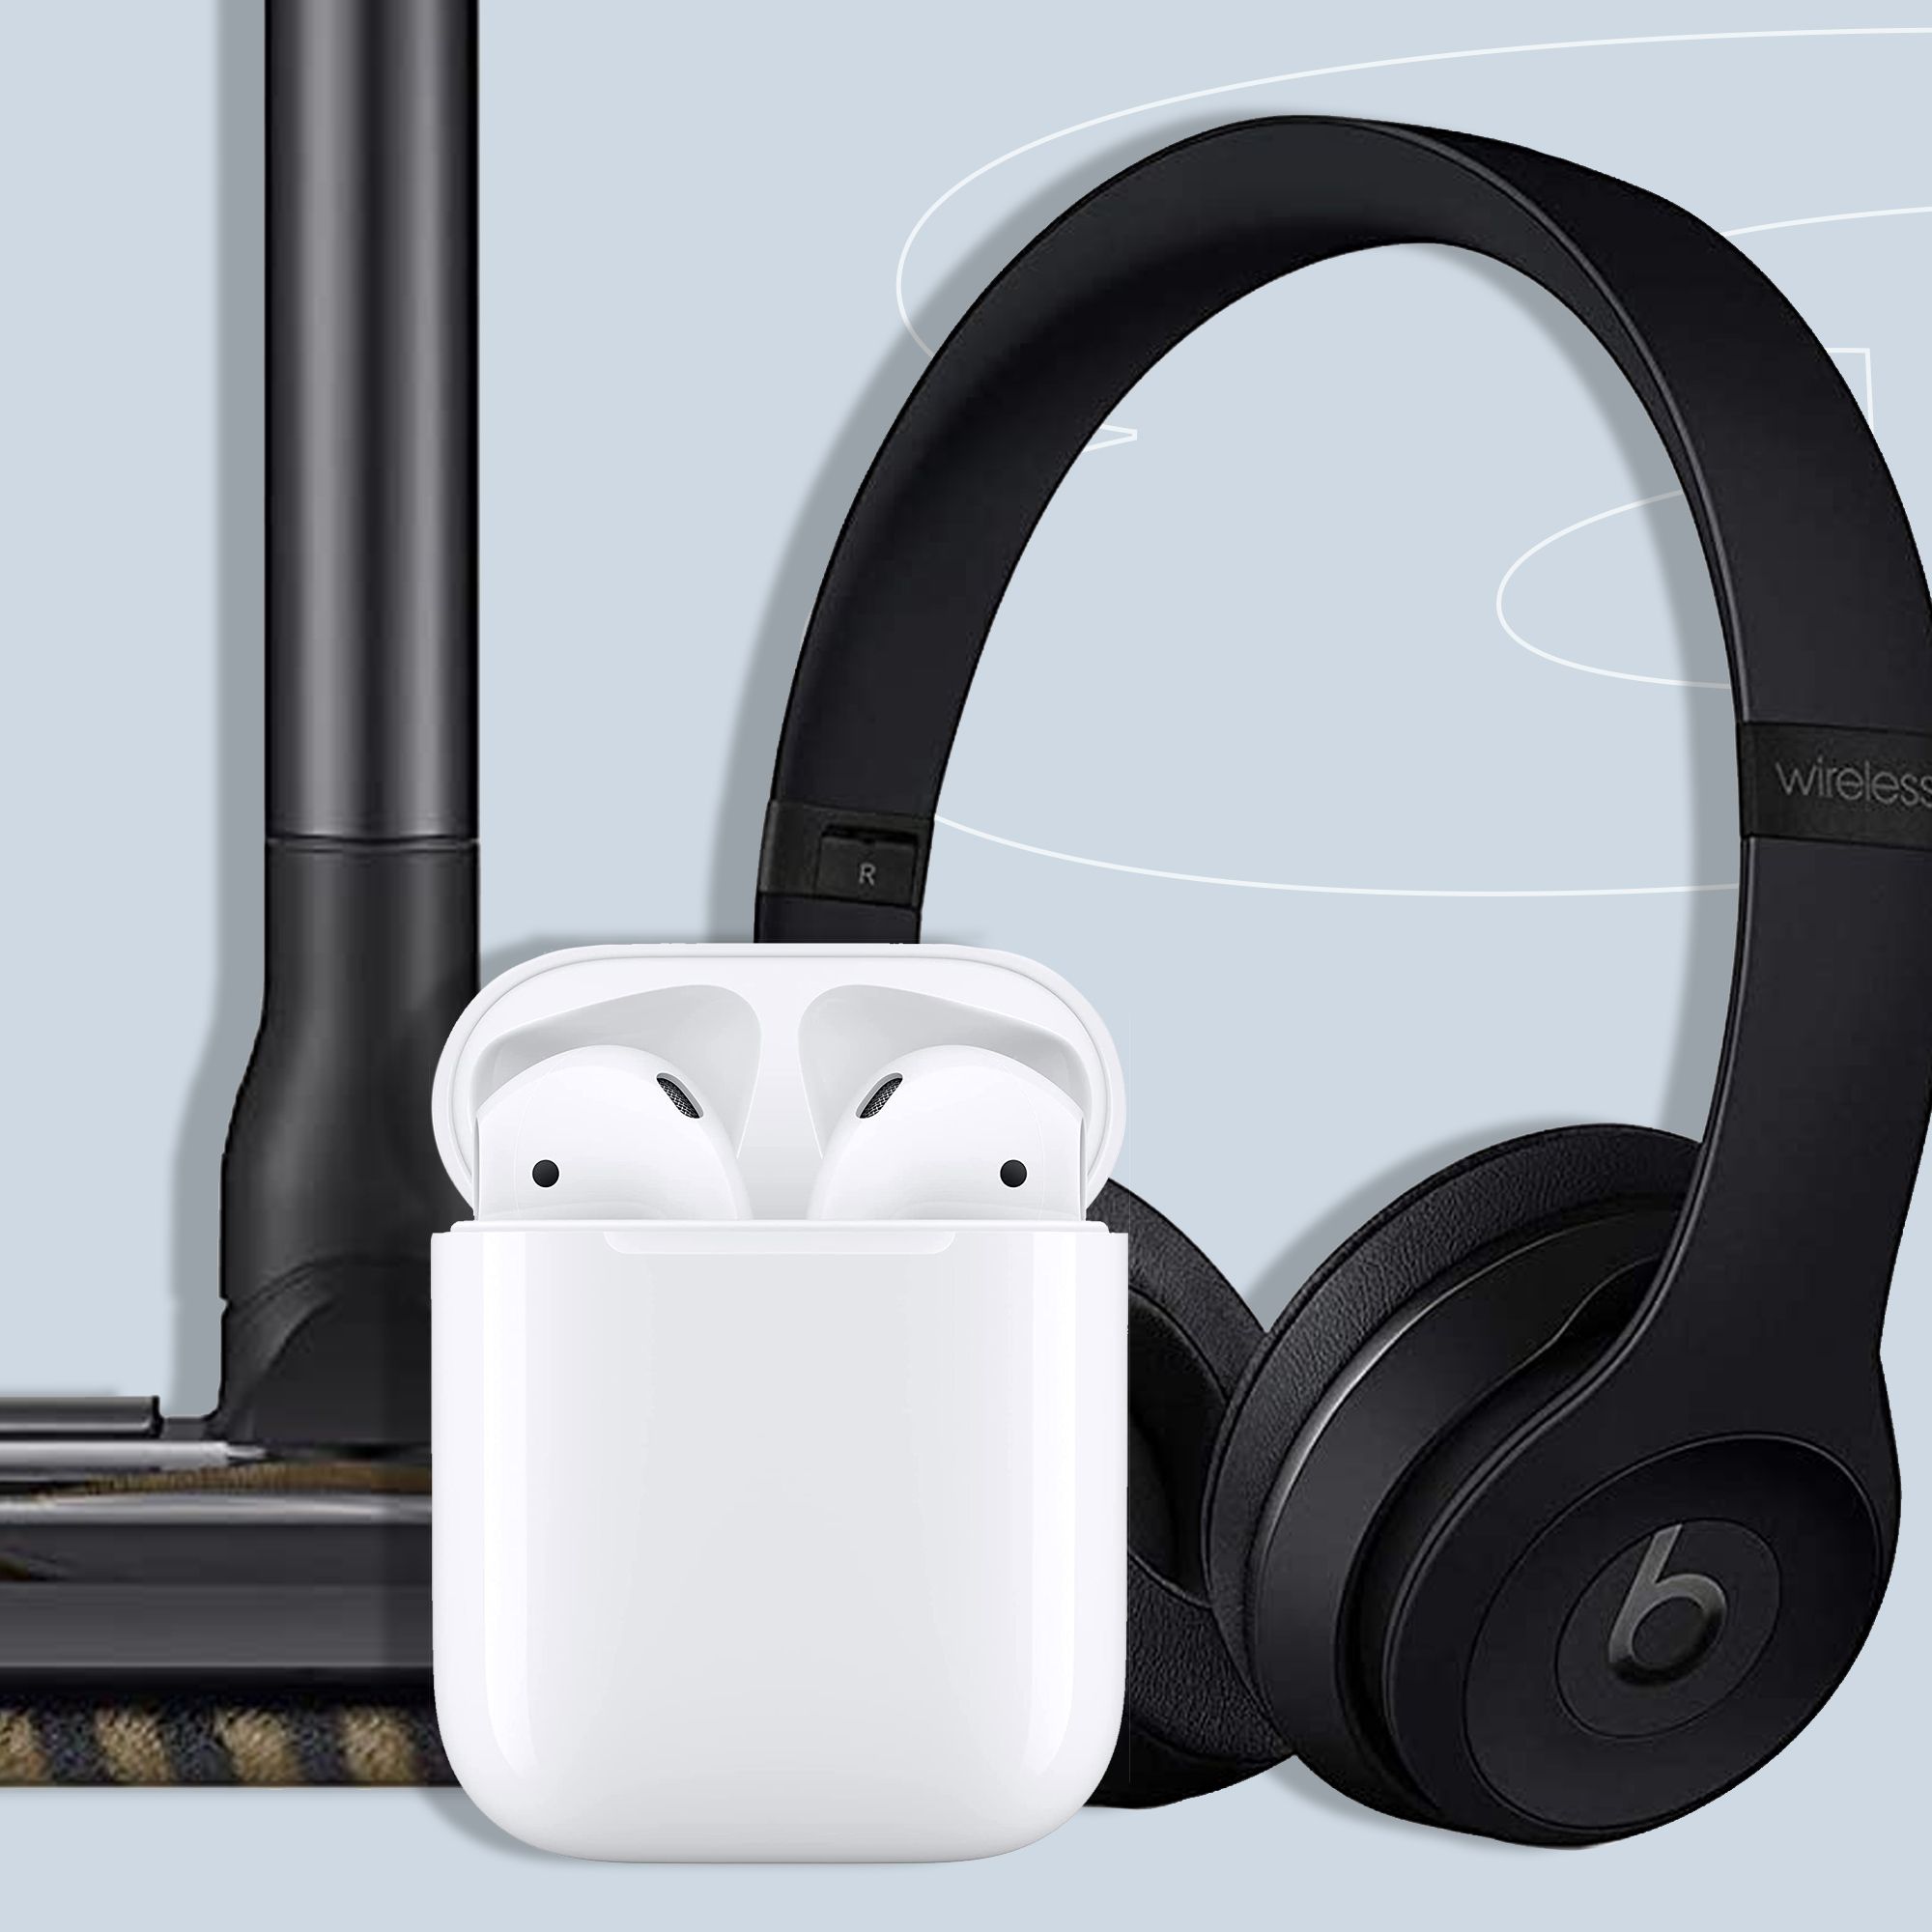 $99 AirPods and 12 More Great Tech Gadgets on Sale